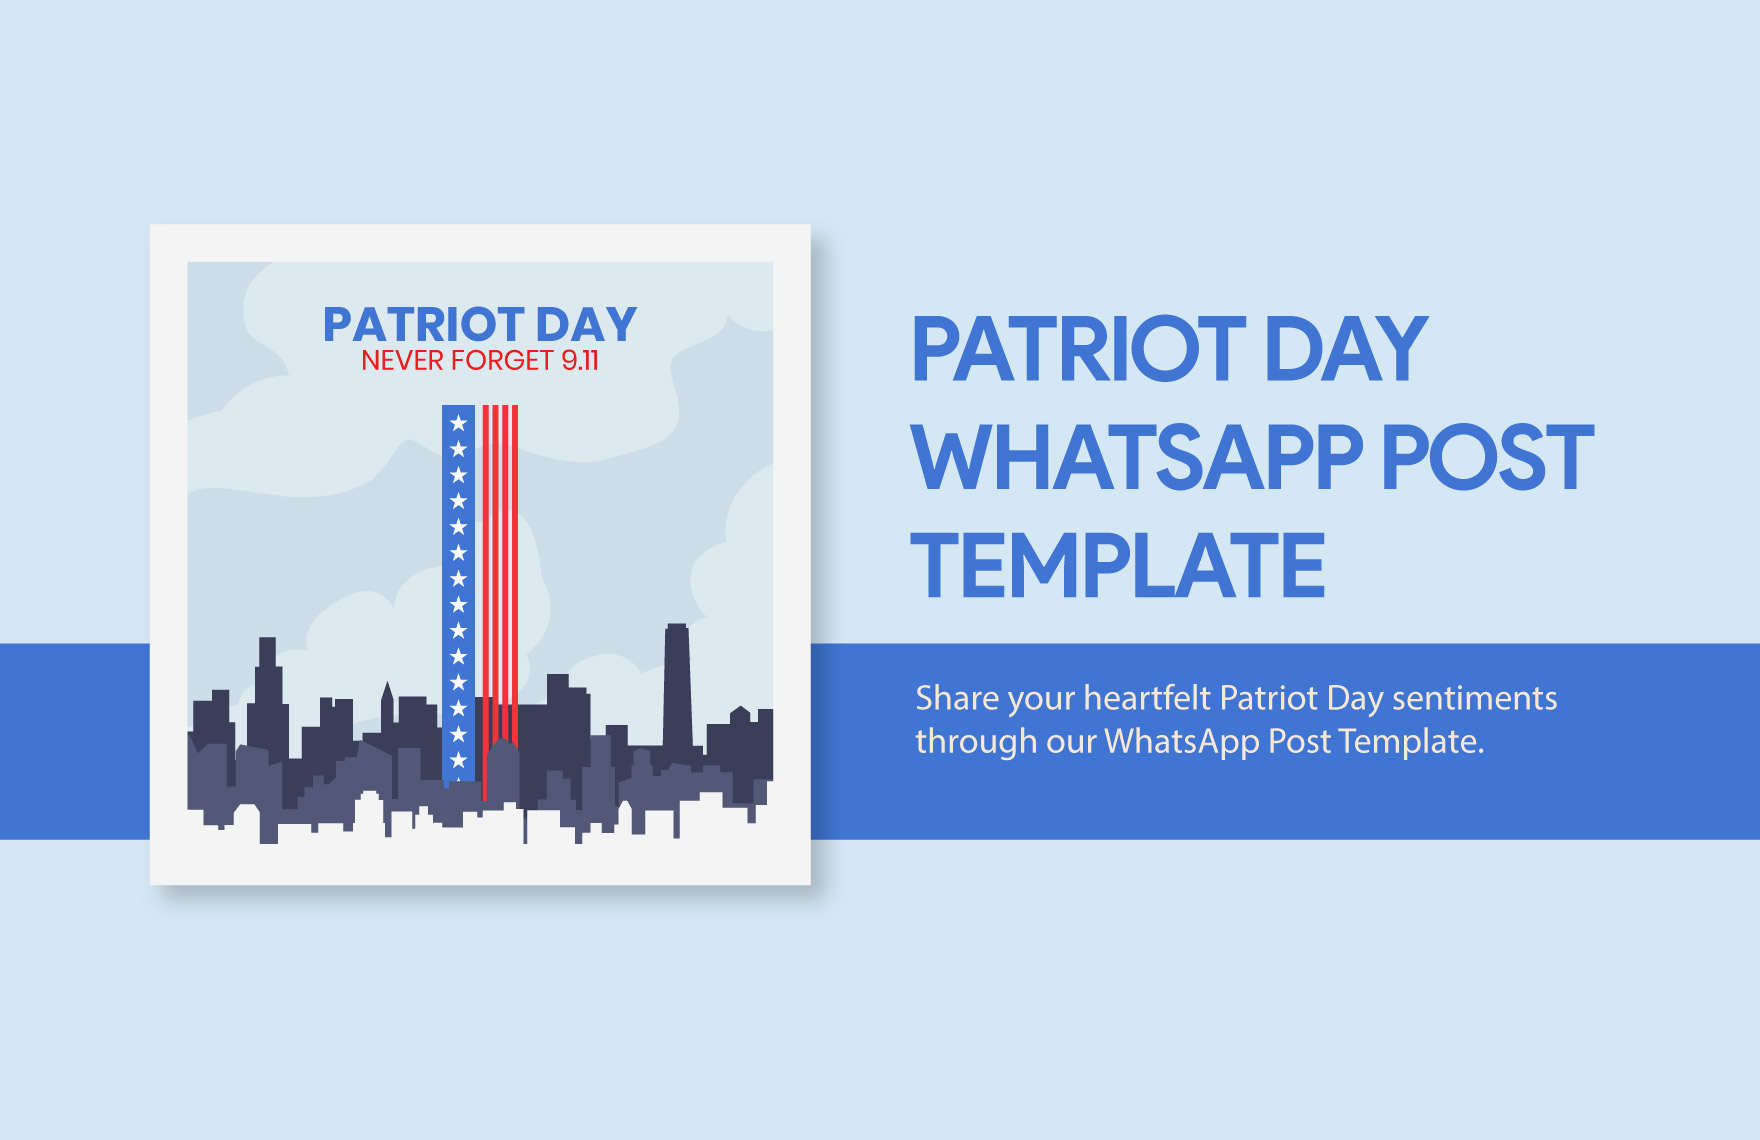 Free Patriot Day WhatsApp Post Template in Illustrator, PSD, PNG